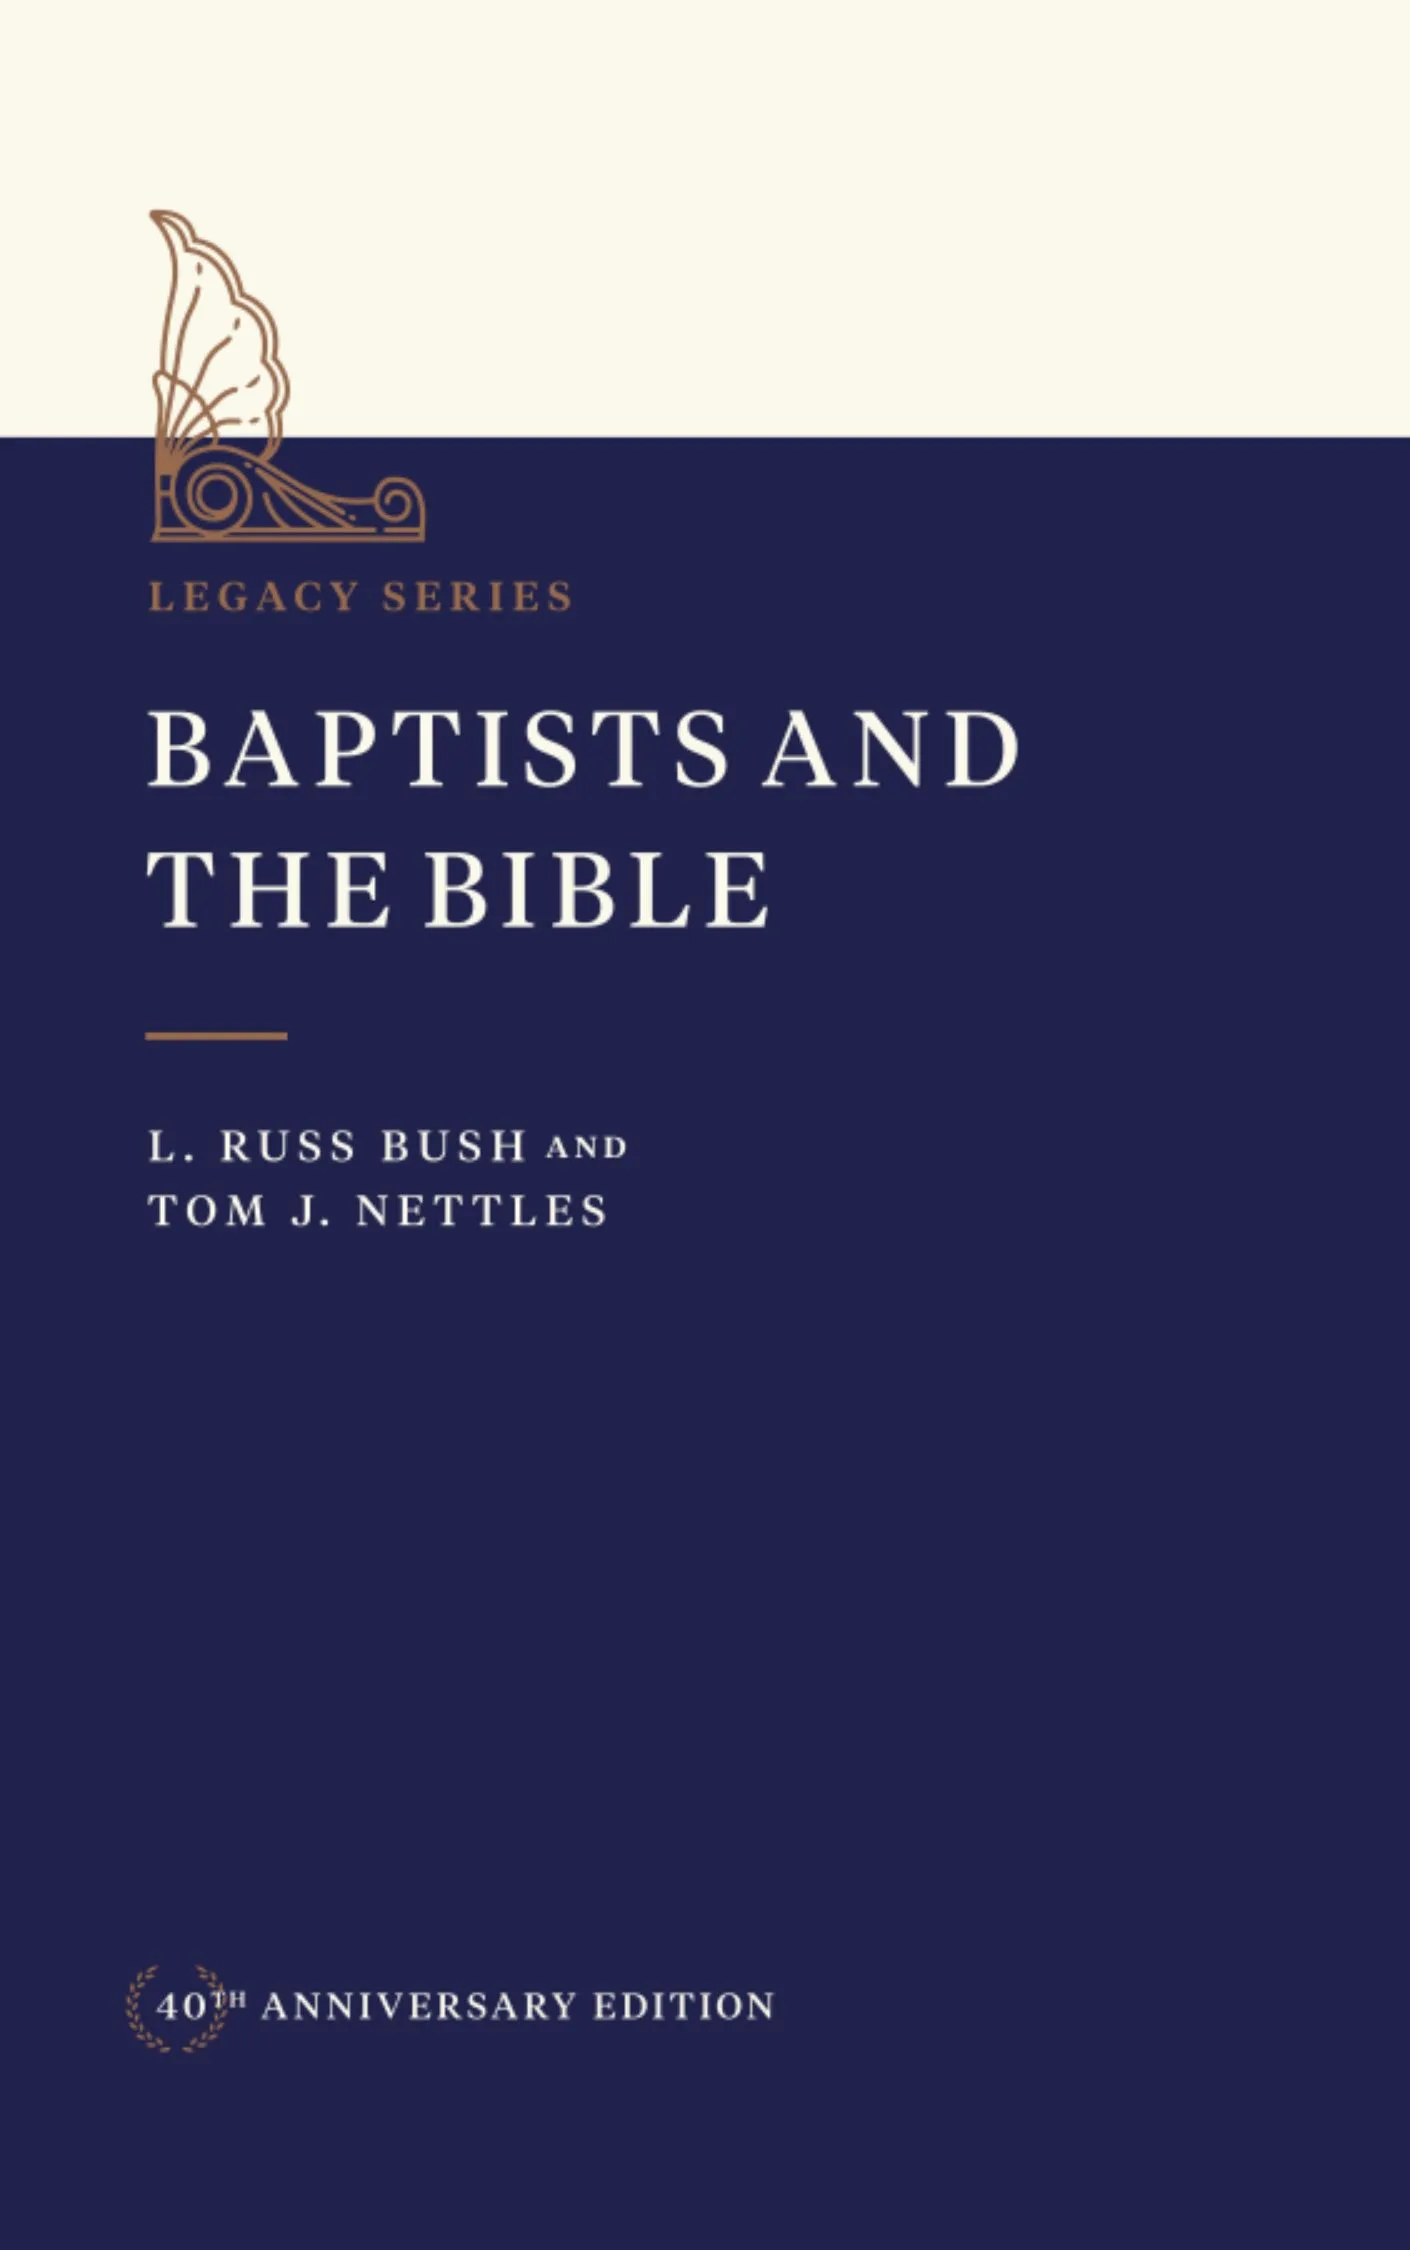 Baptists and the Bible by Russ Bush and Tom Nettles